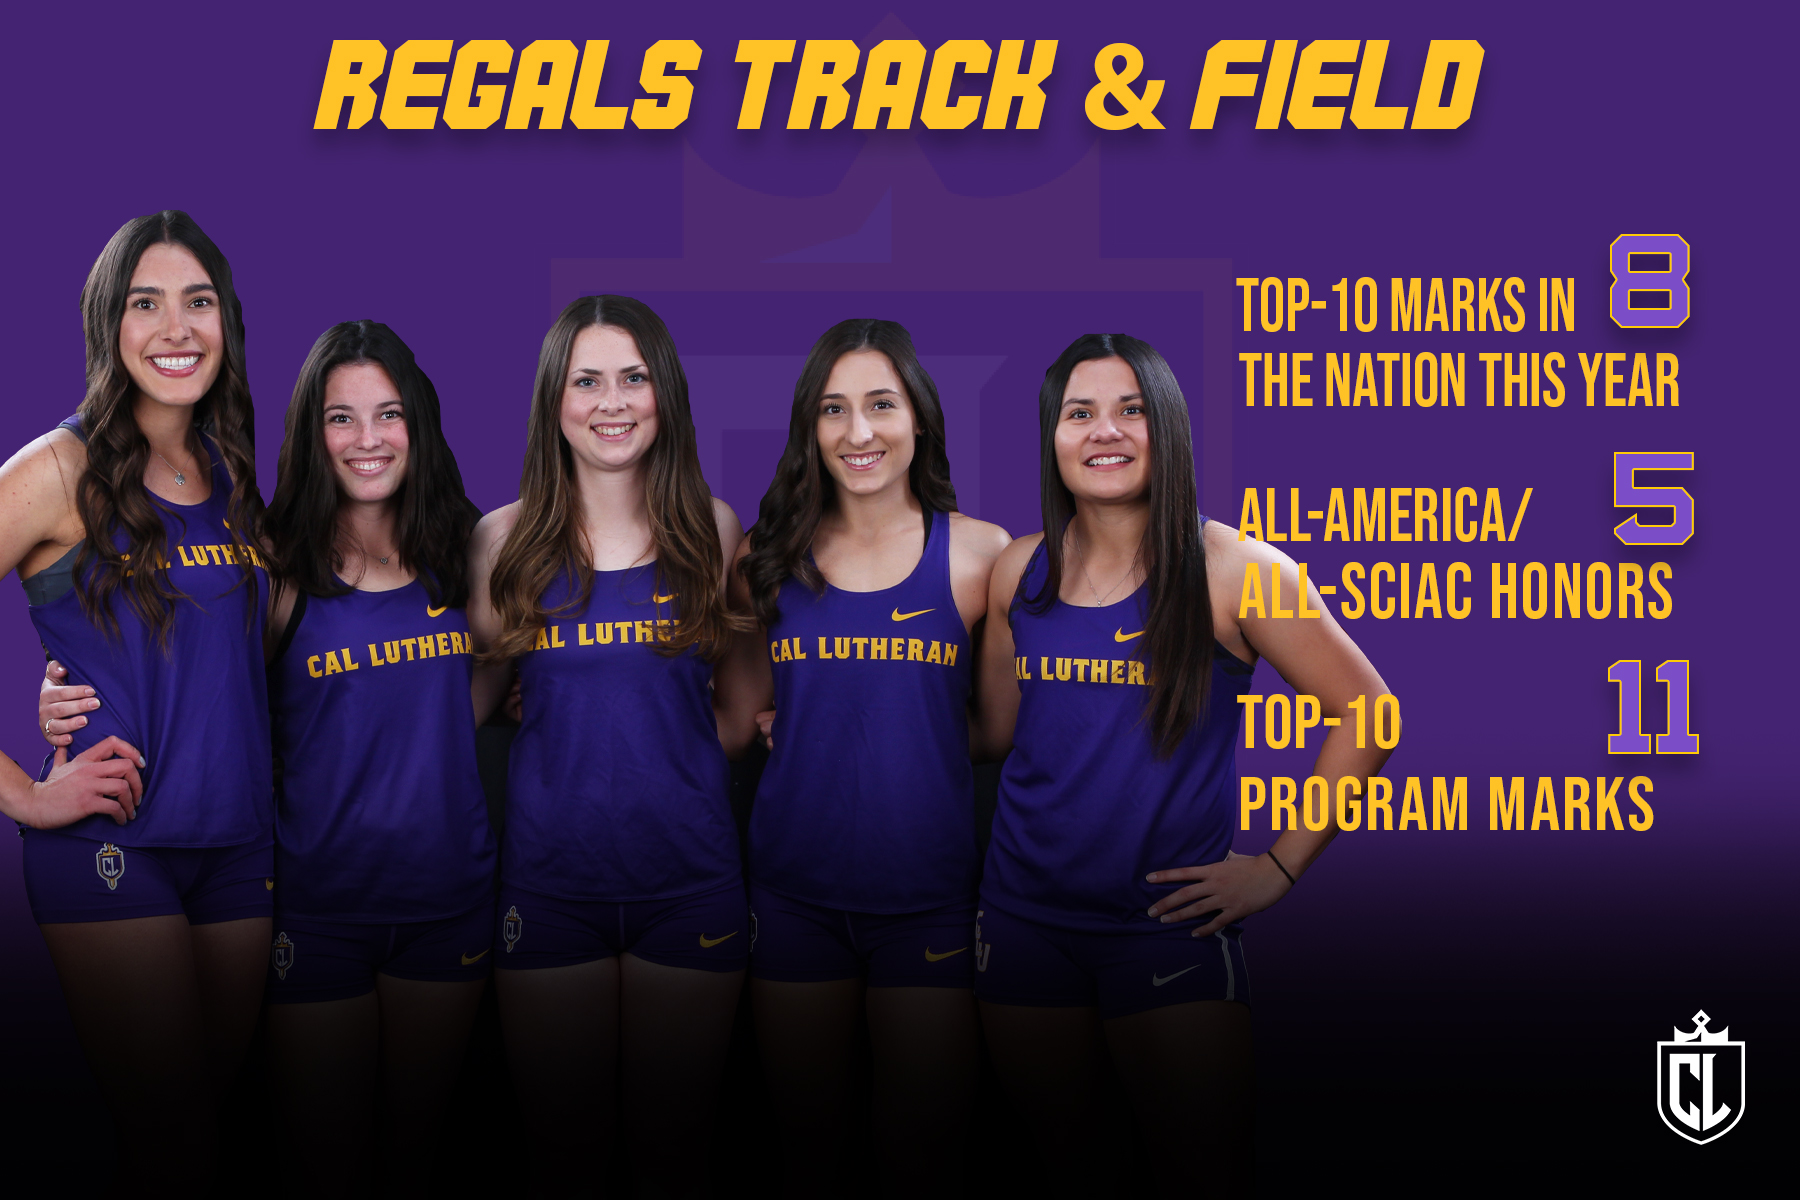 Regals Record Eight Top-10 Marks in the Nation